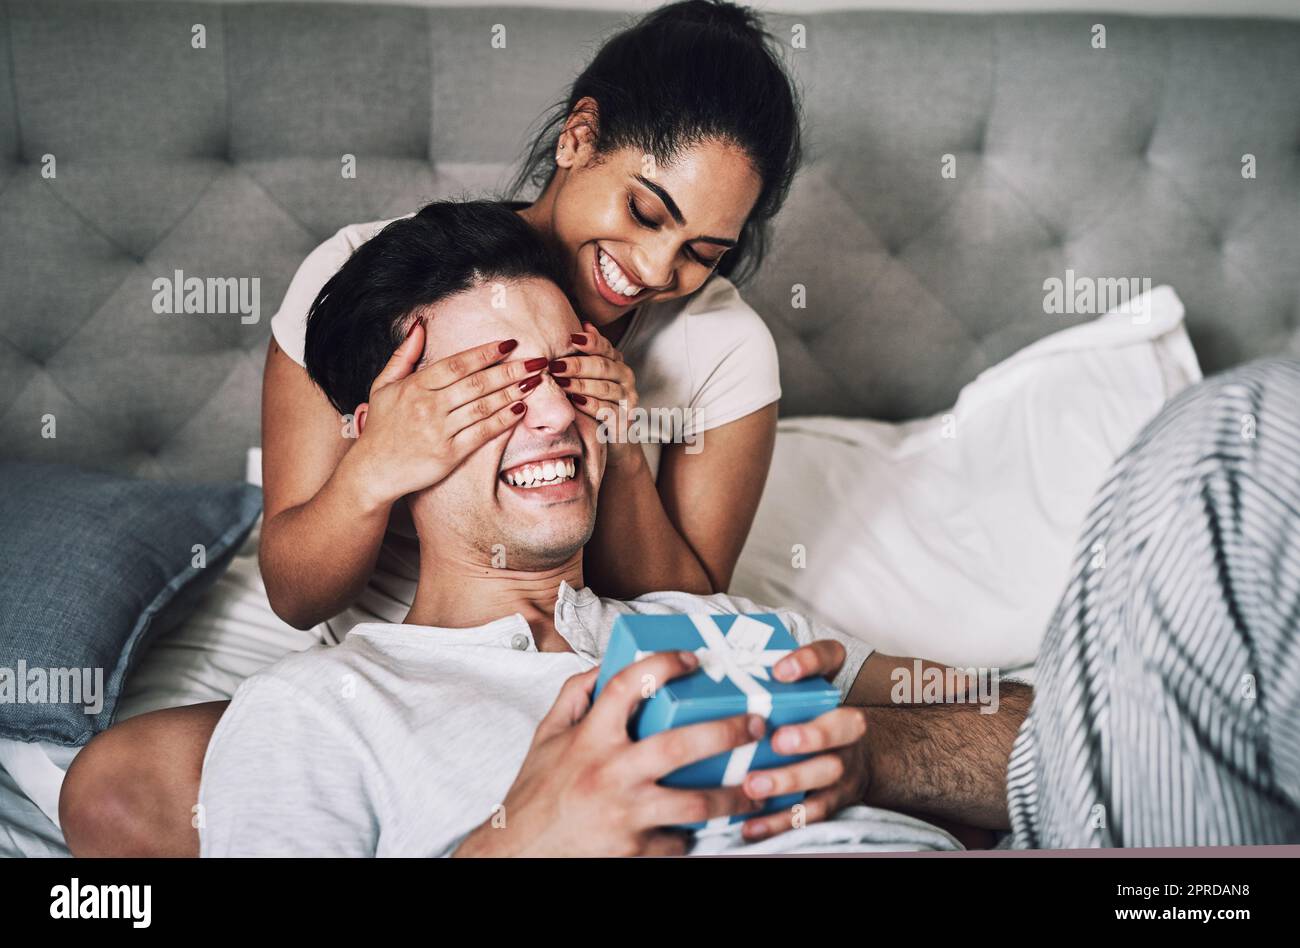 I tricked him into thinking that I forgot his birthday. a woman covering her boyfriends eyes while surprising him with a gift. Stock Photo